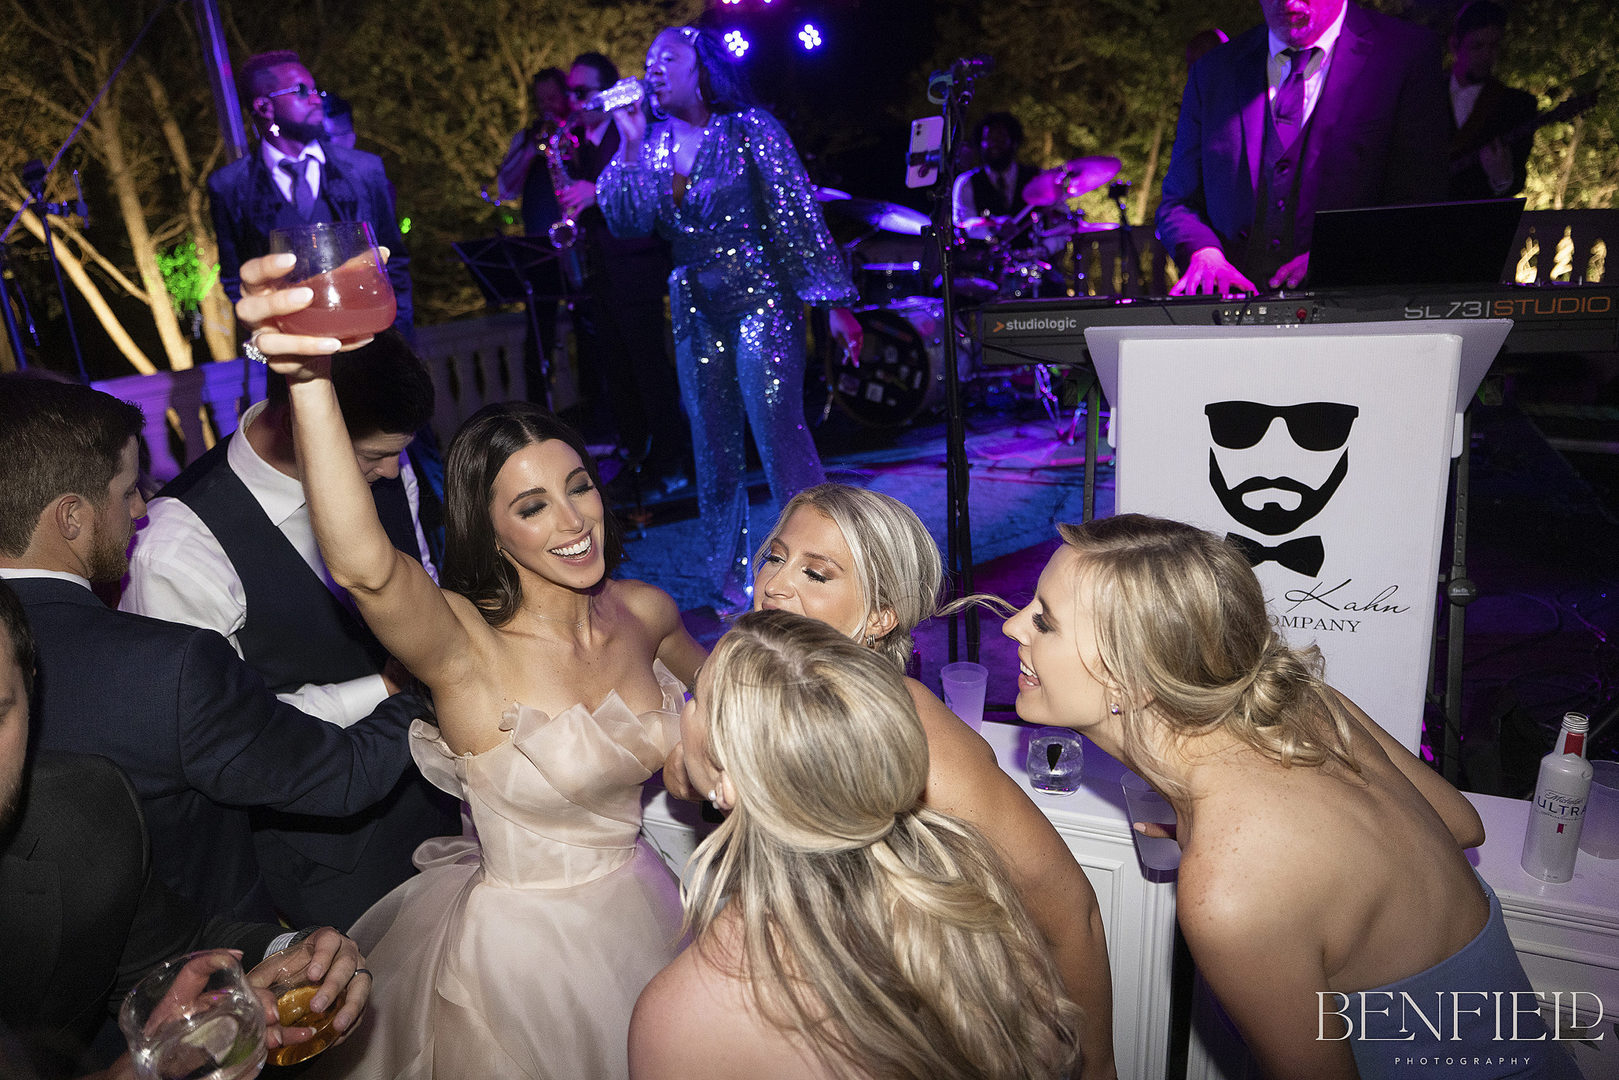 The bride dances with her bridesmaids to Jordan Kahn Music group during her wedding reception at Hillside Estate in Crossroads Texas